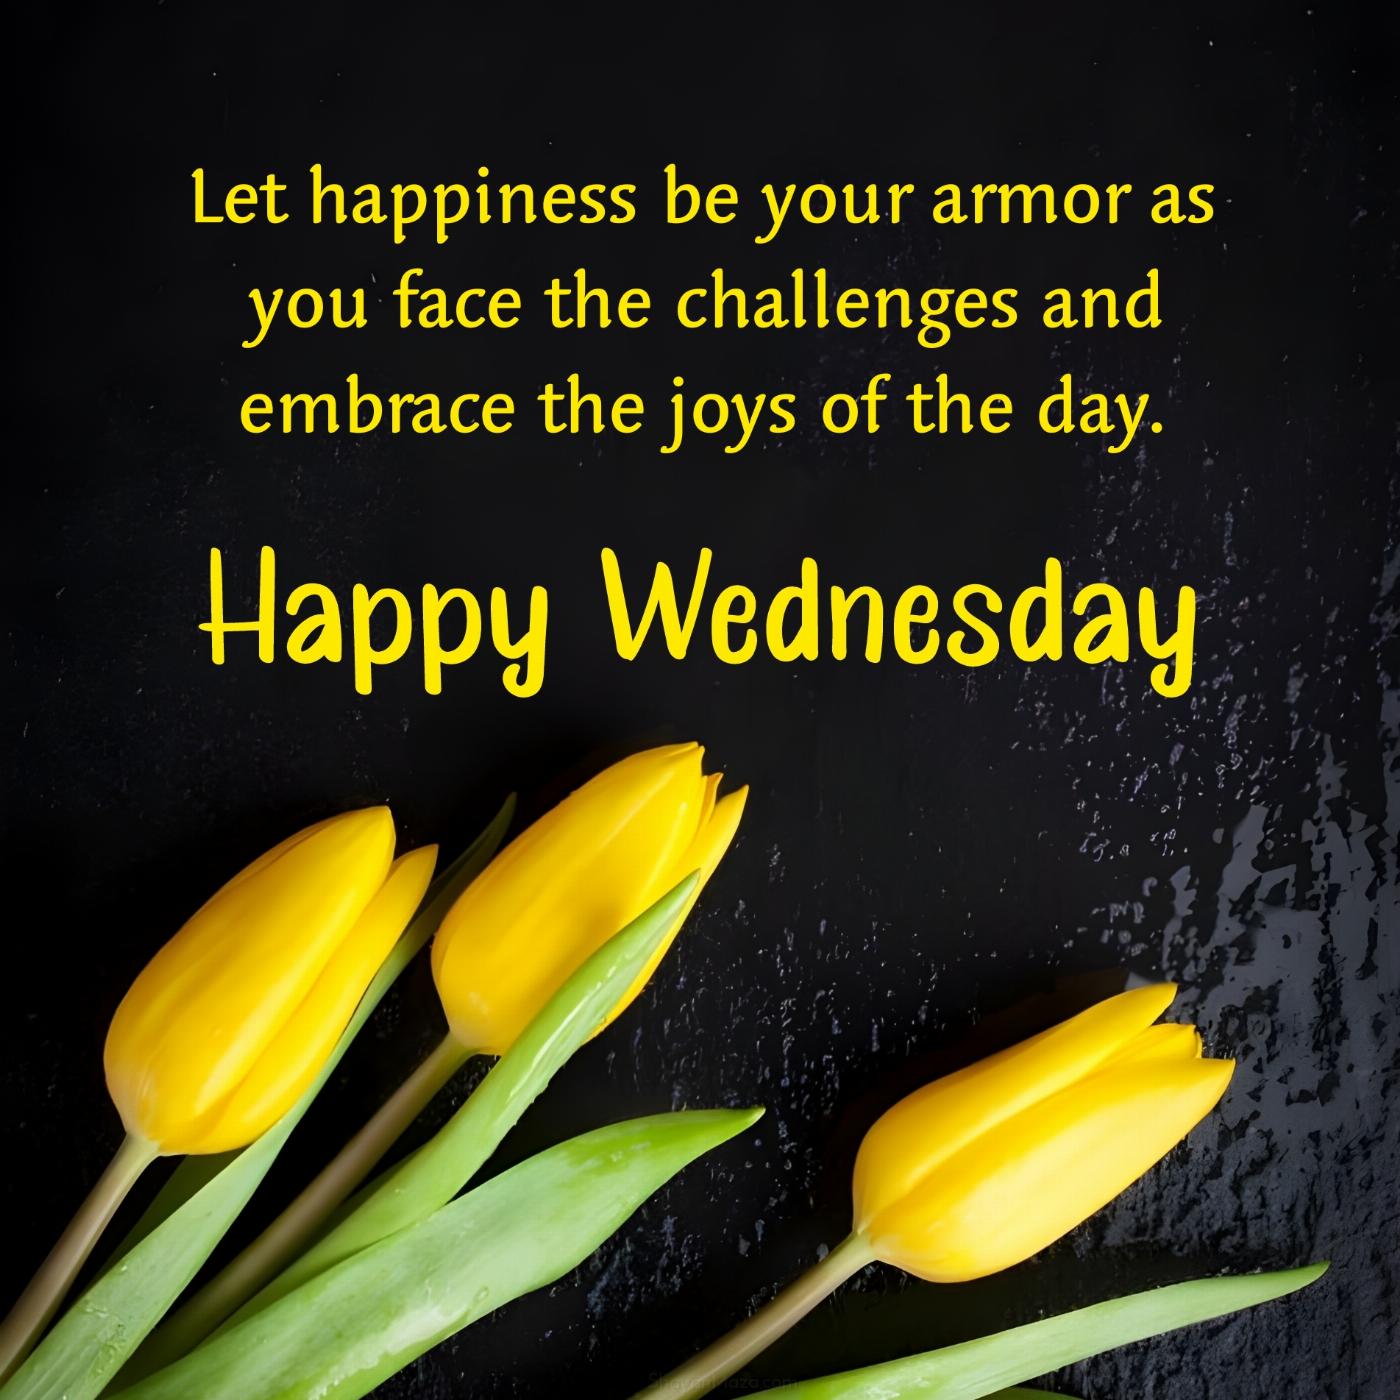 Happy Wednesday! Let happiness be your armor